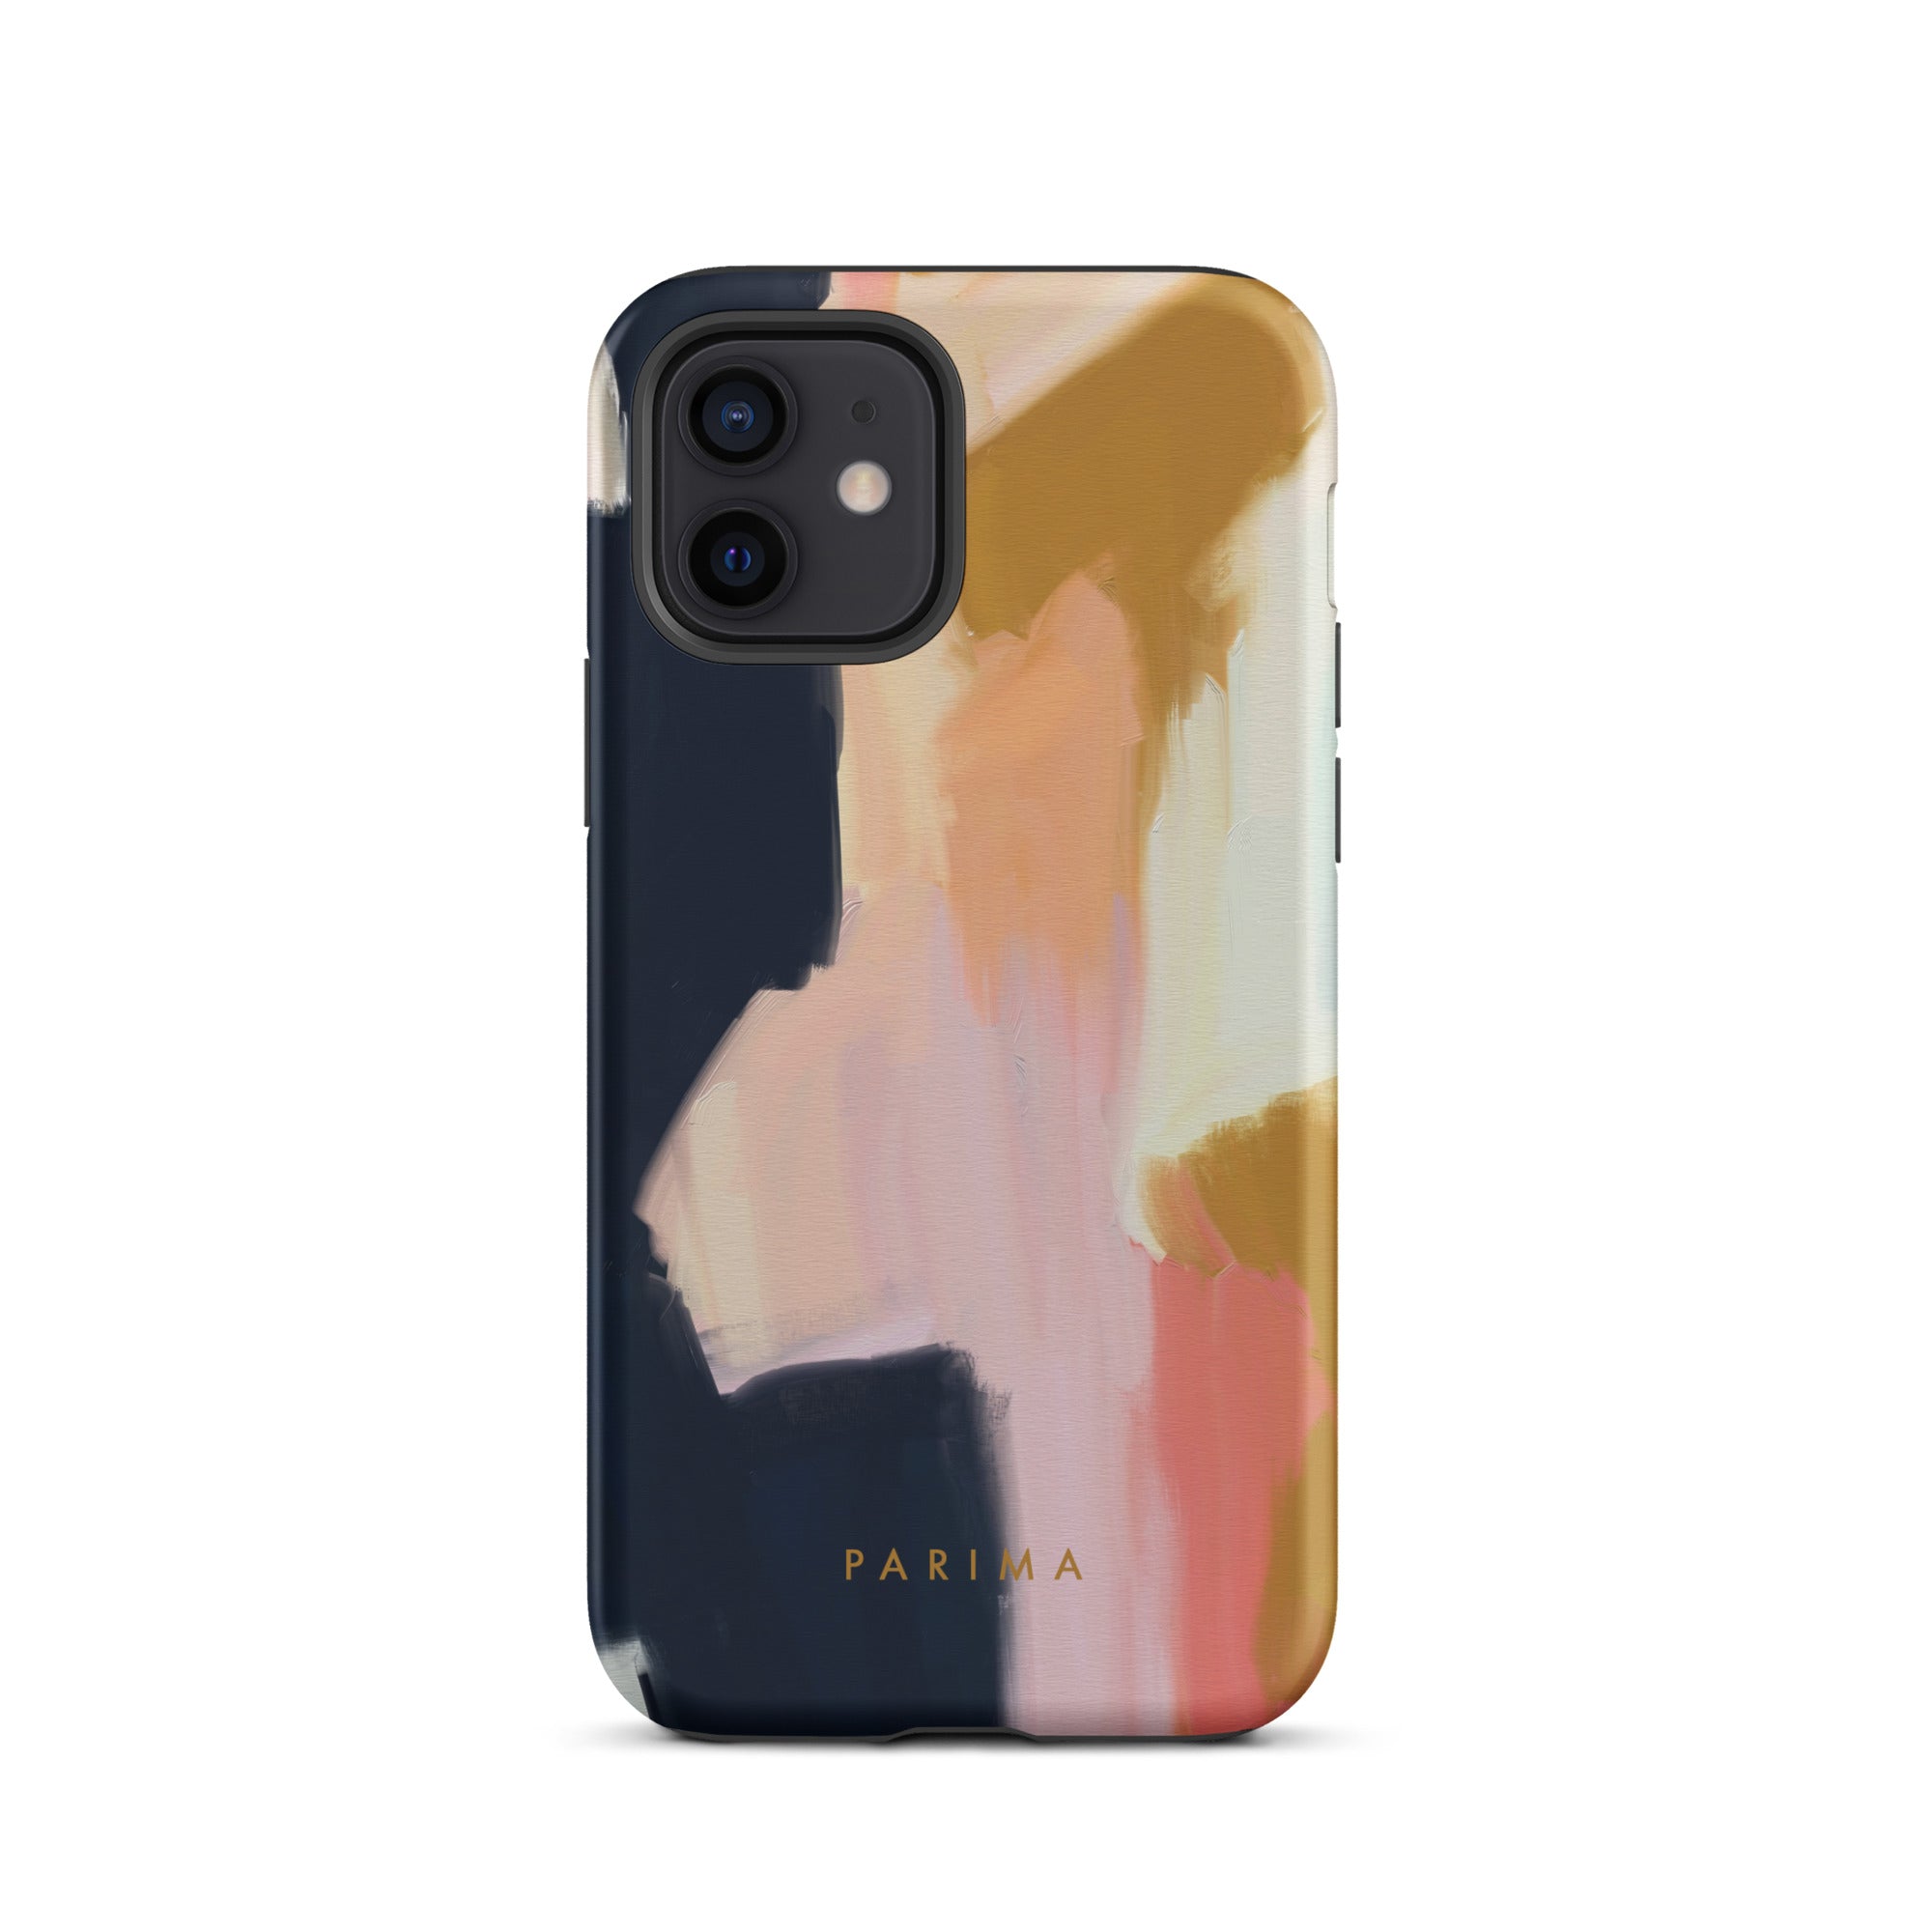 Kali, blue and gold abstract art - iPhone 12 tough case by Parima Studio